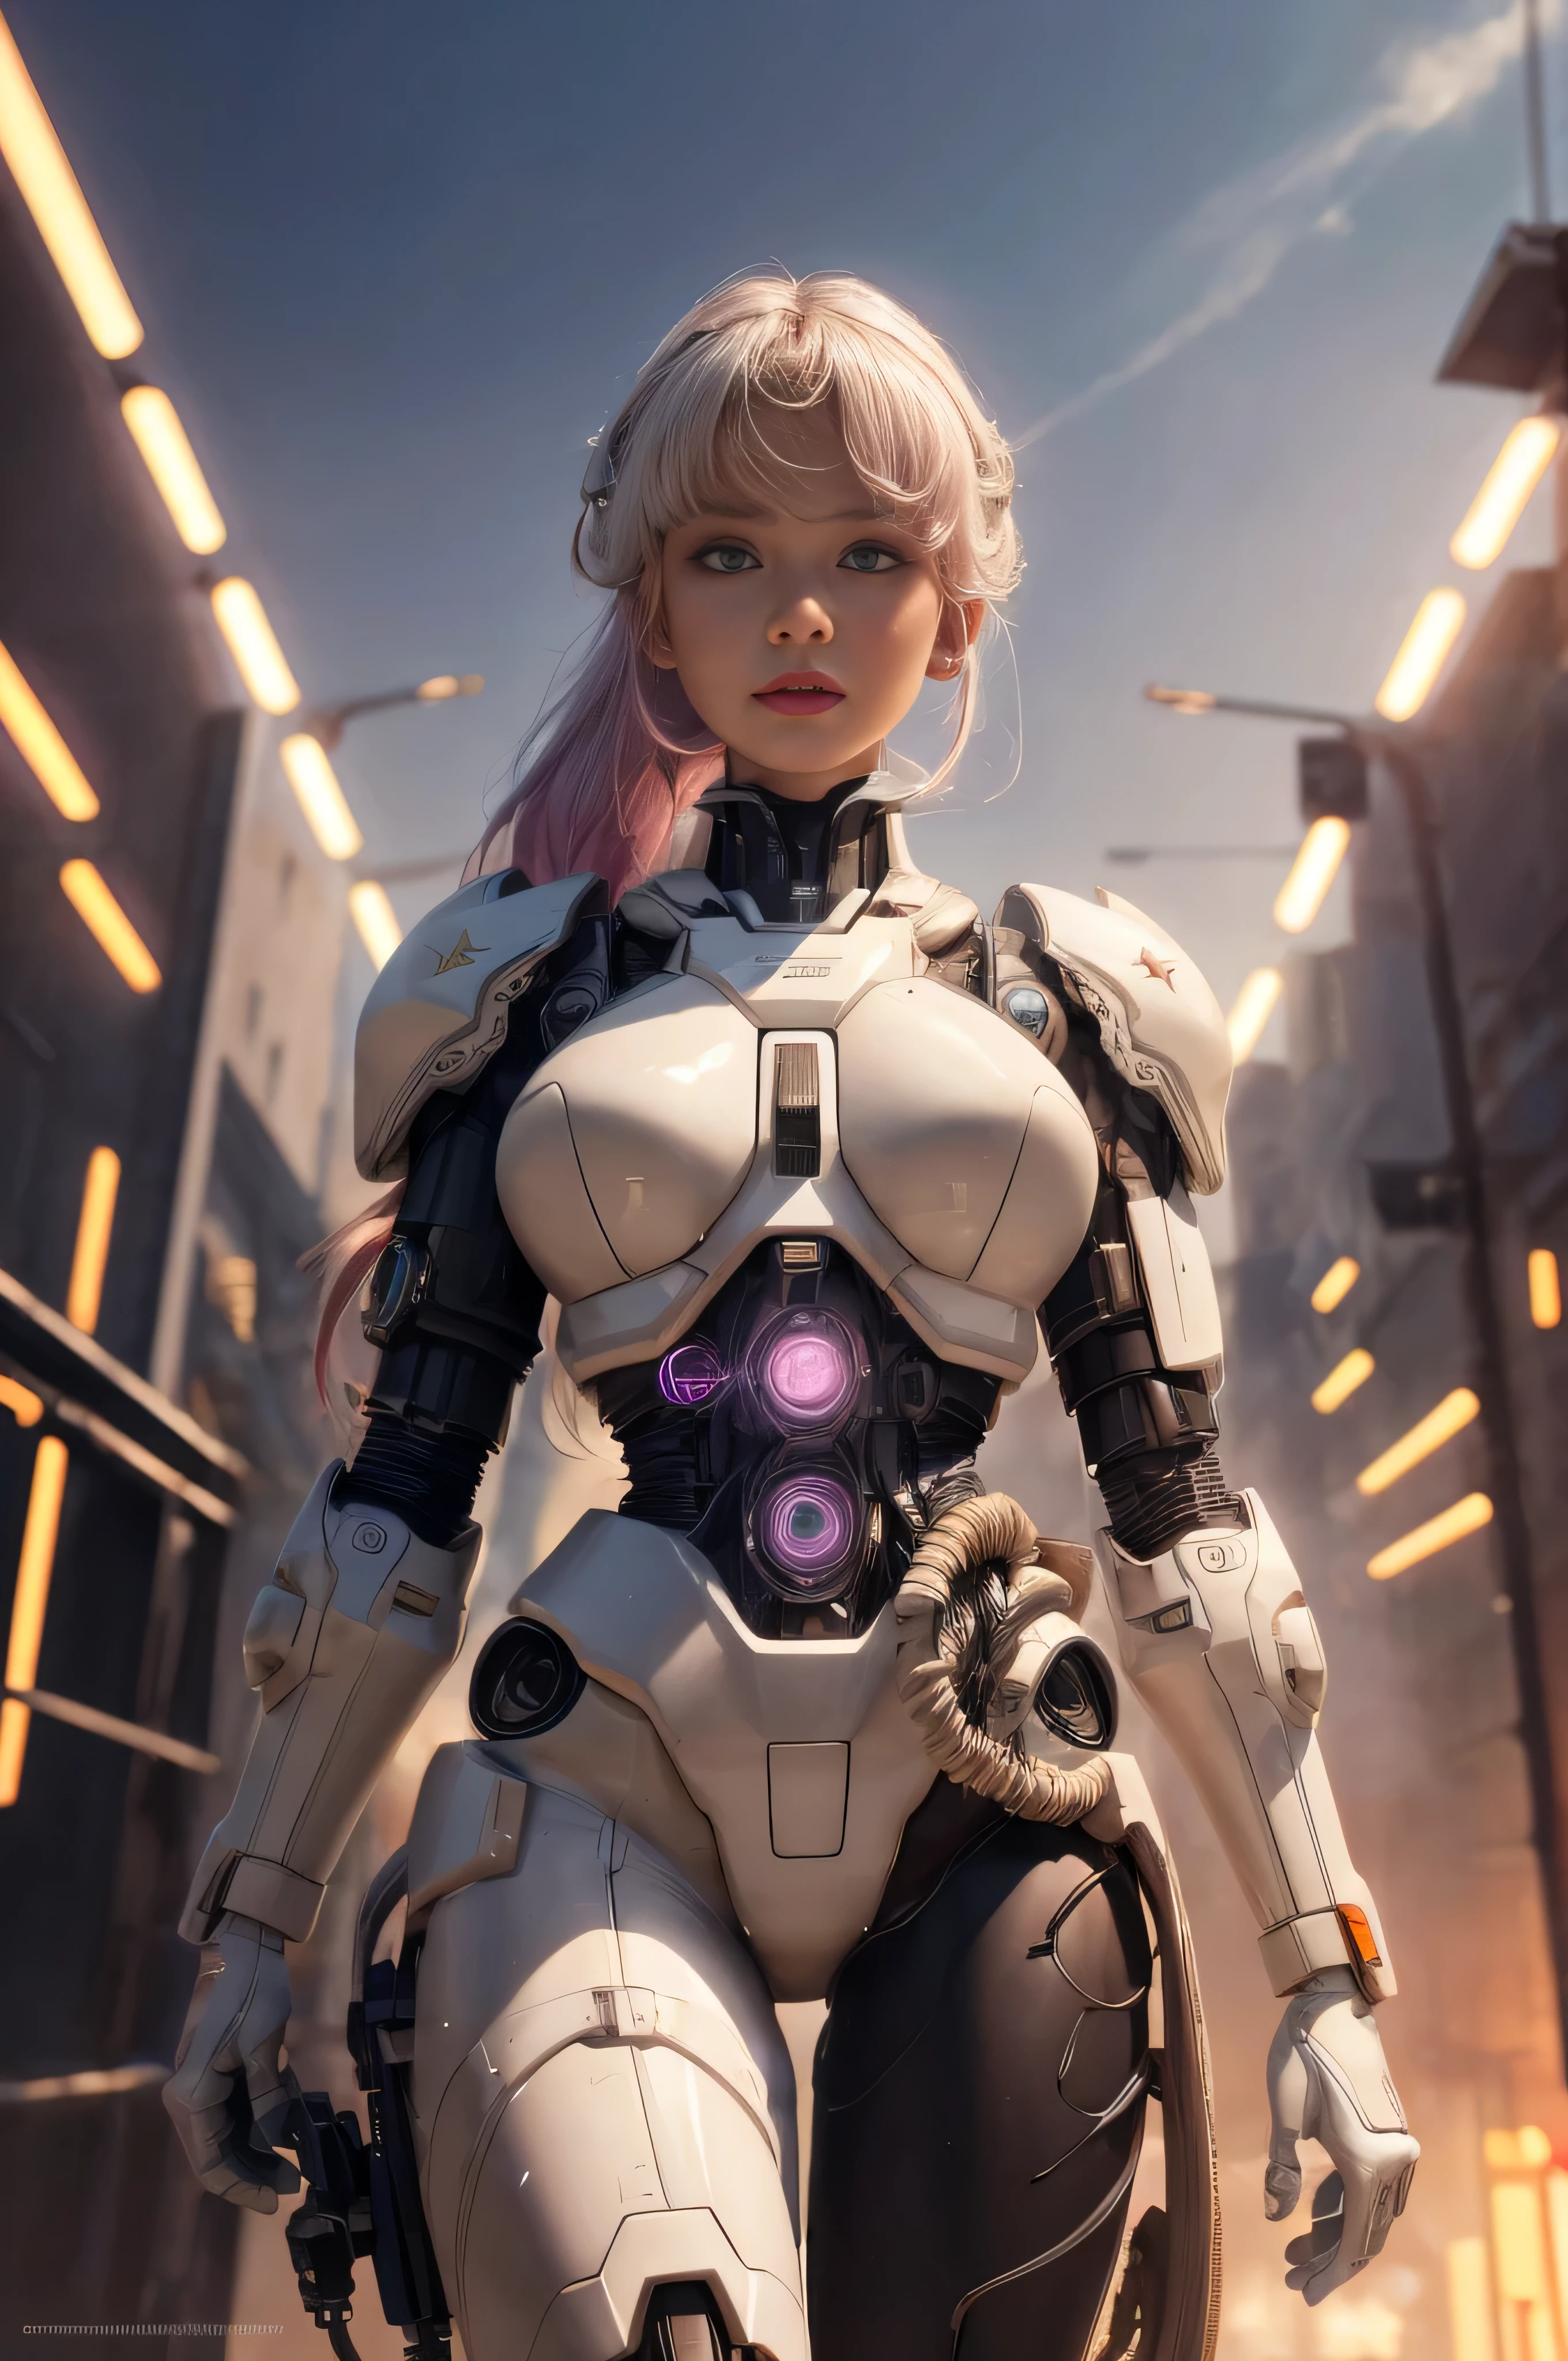 1mechanical_girl_with_kidou_keisatsu_patlabor_body , wearing_intricate_bioluminescent_mechanical_cyborg_armor_made_out_of ((white_beige_old_plastic)) , ((ultra realistic details)), detailed_face, global_illumination, shadows, octane_render, 8k, ultra_sharp, metal, ornaments_detailed, cold_colors, egypician_detail, highly_intricate_details, realistic_light, trending_on_cgsociety, glowing_eyes, look down on someone, ((from below)), lifted by self, looking at viewer, neon_details, machanical_limbs, blood_vessels_connected_to_tubes, ((lot_wires_and_cables_connecting_to_head_and_body)), killing_machine, extremely_sexy, lustful, medium breasts, slutty , official wallpaper, NSFW, In the style of Neon Genesis Evangelion, you find yourself standing on a desolate, post - apocalyptic wasteland, as the distant ruins of a massive city loom on the horizon. The sky is filled with ominous clouds, as a massive creature towers in the distance, cinematic light, dramatic light, pink + violet